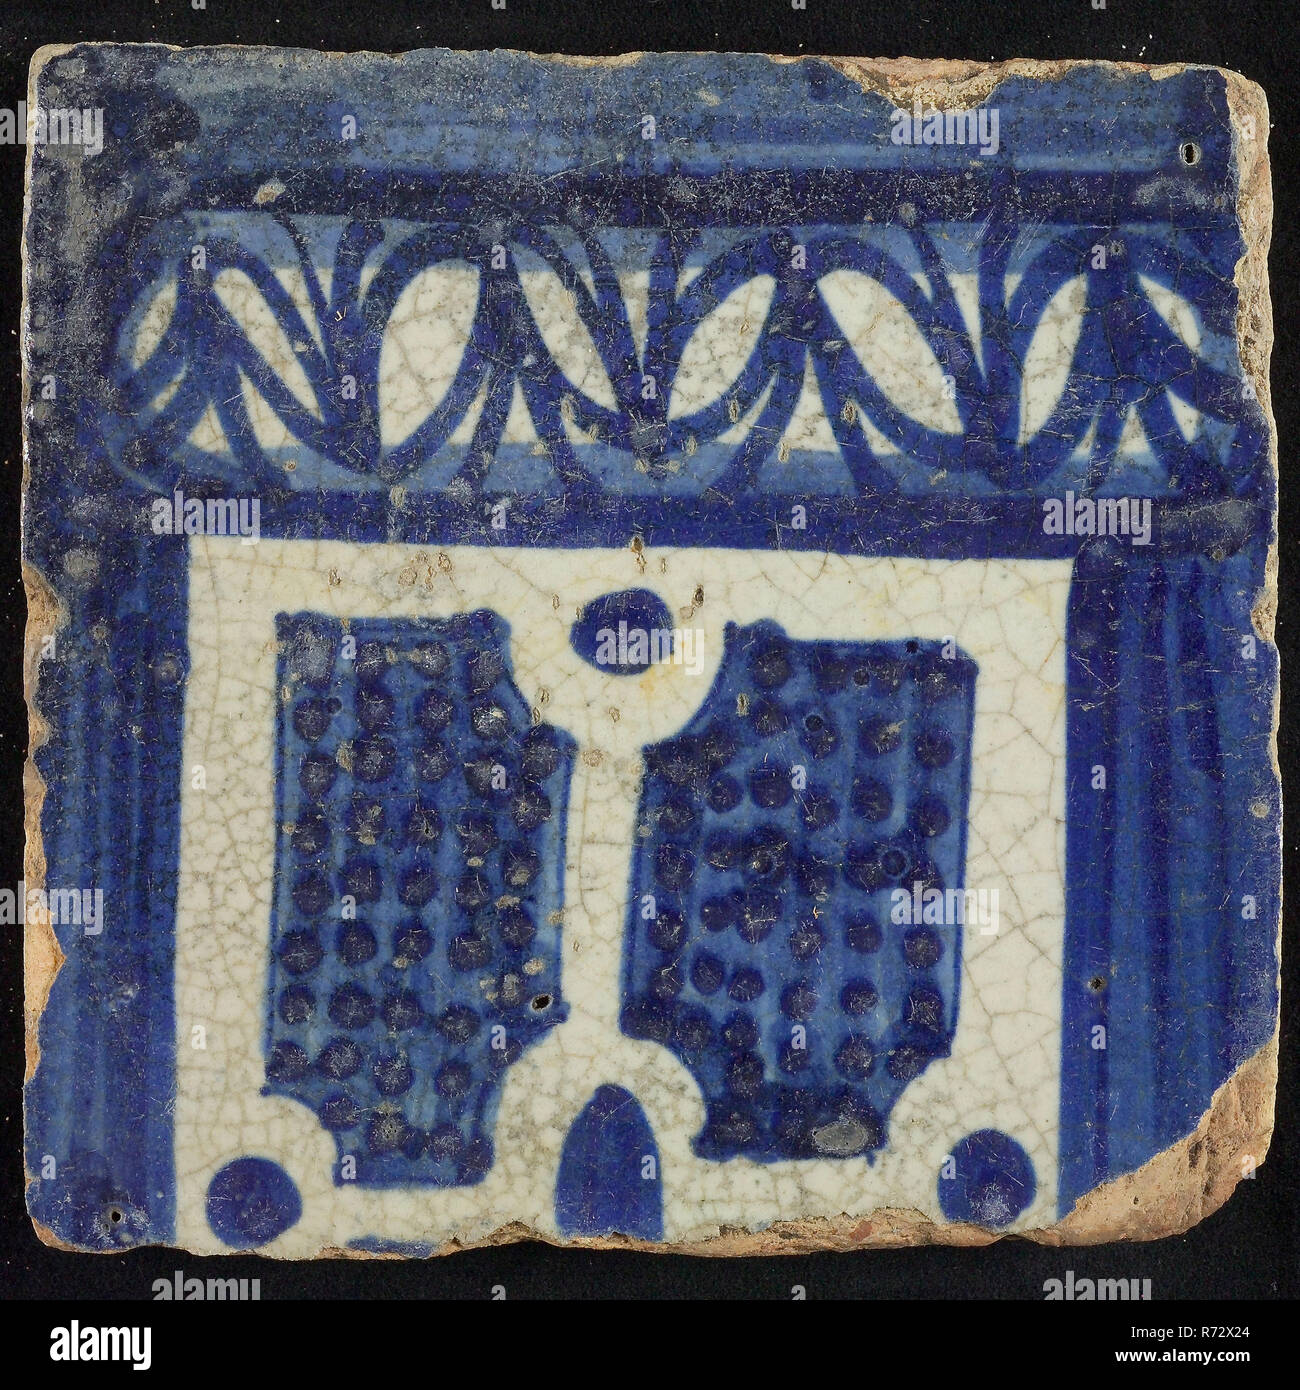 Tile of chimney pilaster, blue on white, bottom of column with basement with leaf motif, compartment with dots, chimney pilaster tile pellet image fragment ceramic earthenware glaze, baked 2x glazed painted Tile part of chimney pilaster originally twelve or thirteen high Rony shard square two nail holes. Blue on white fond. Tile forms part of single-row pilaster in Renaissance style and shows the underside of column with division with dark blue dots on the blue background. on Rotterdam in May 1940. Stock Photo